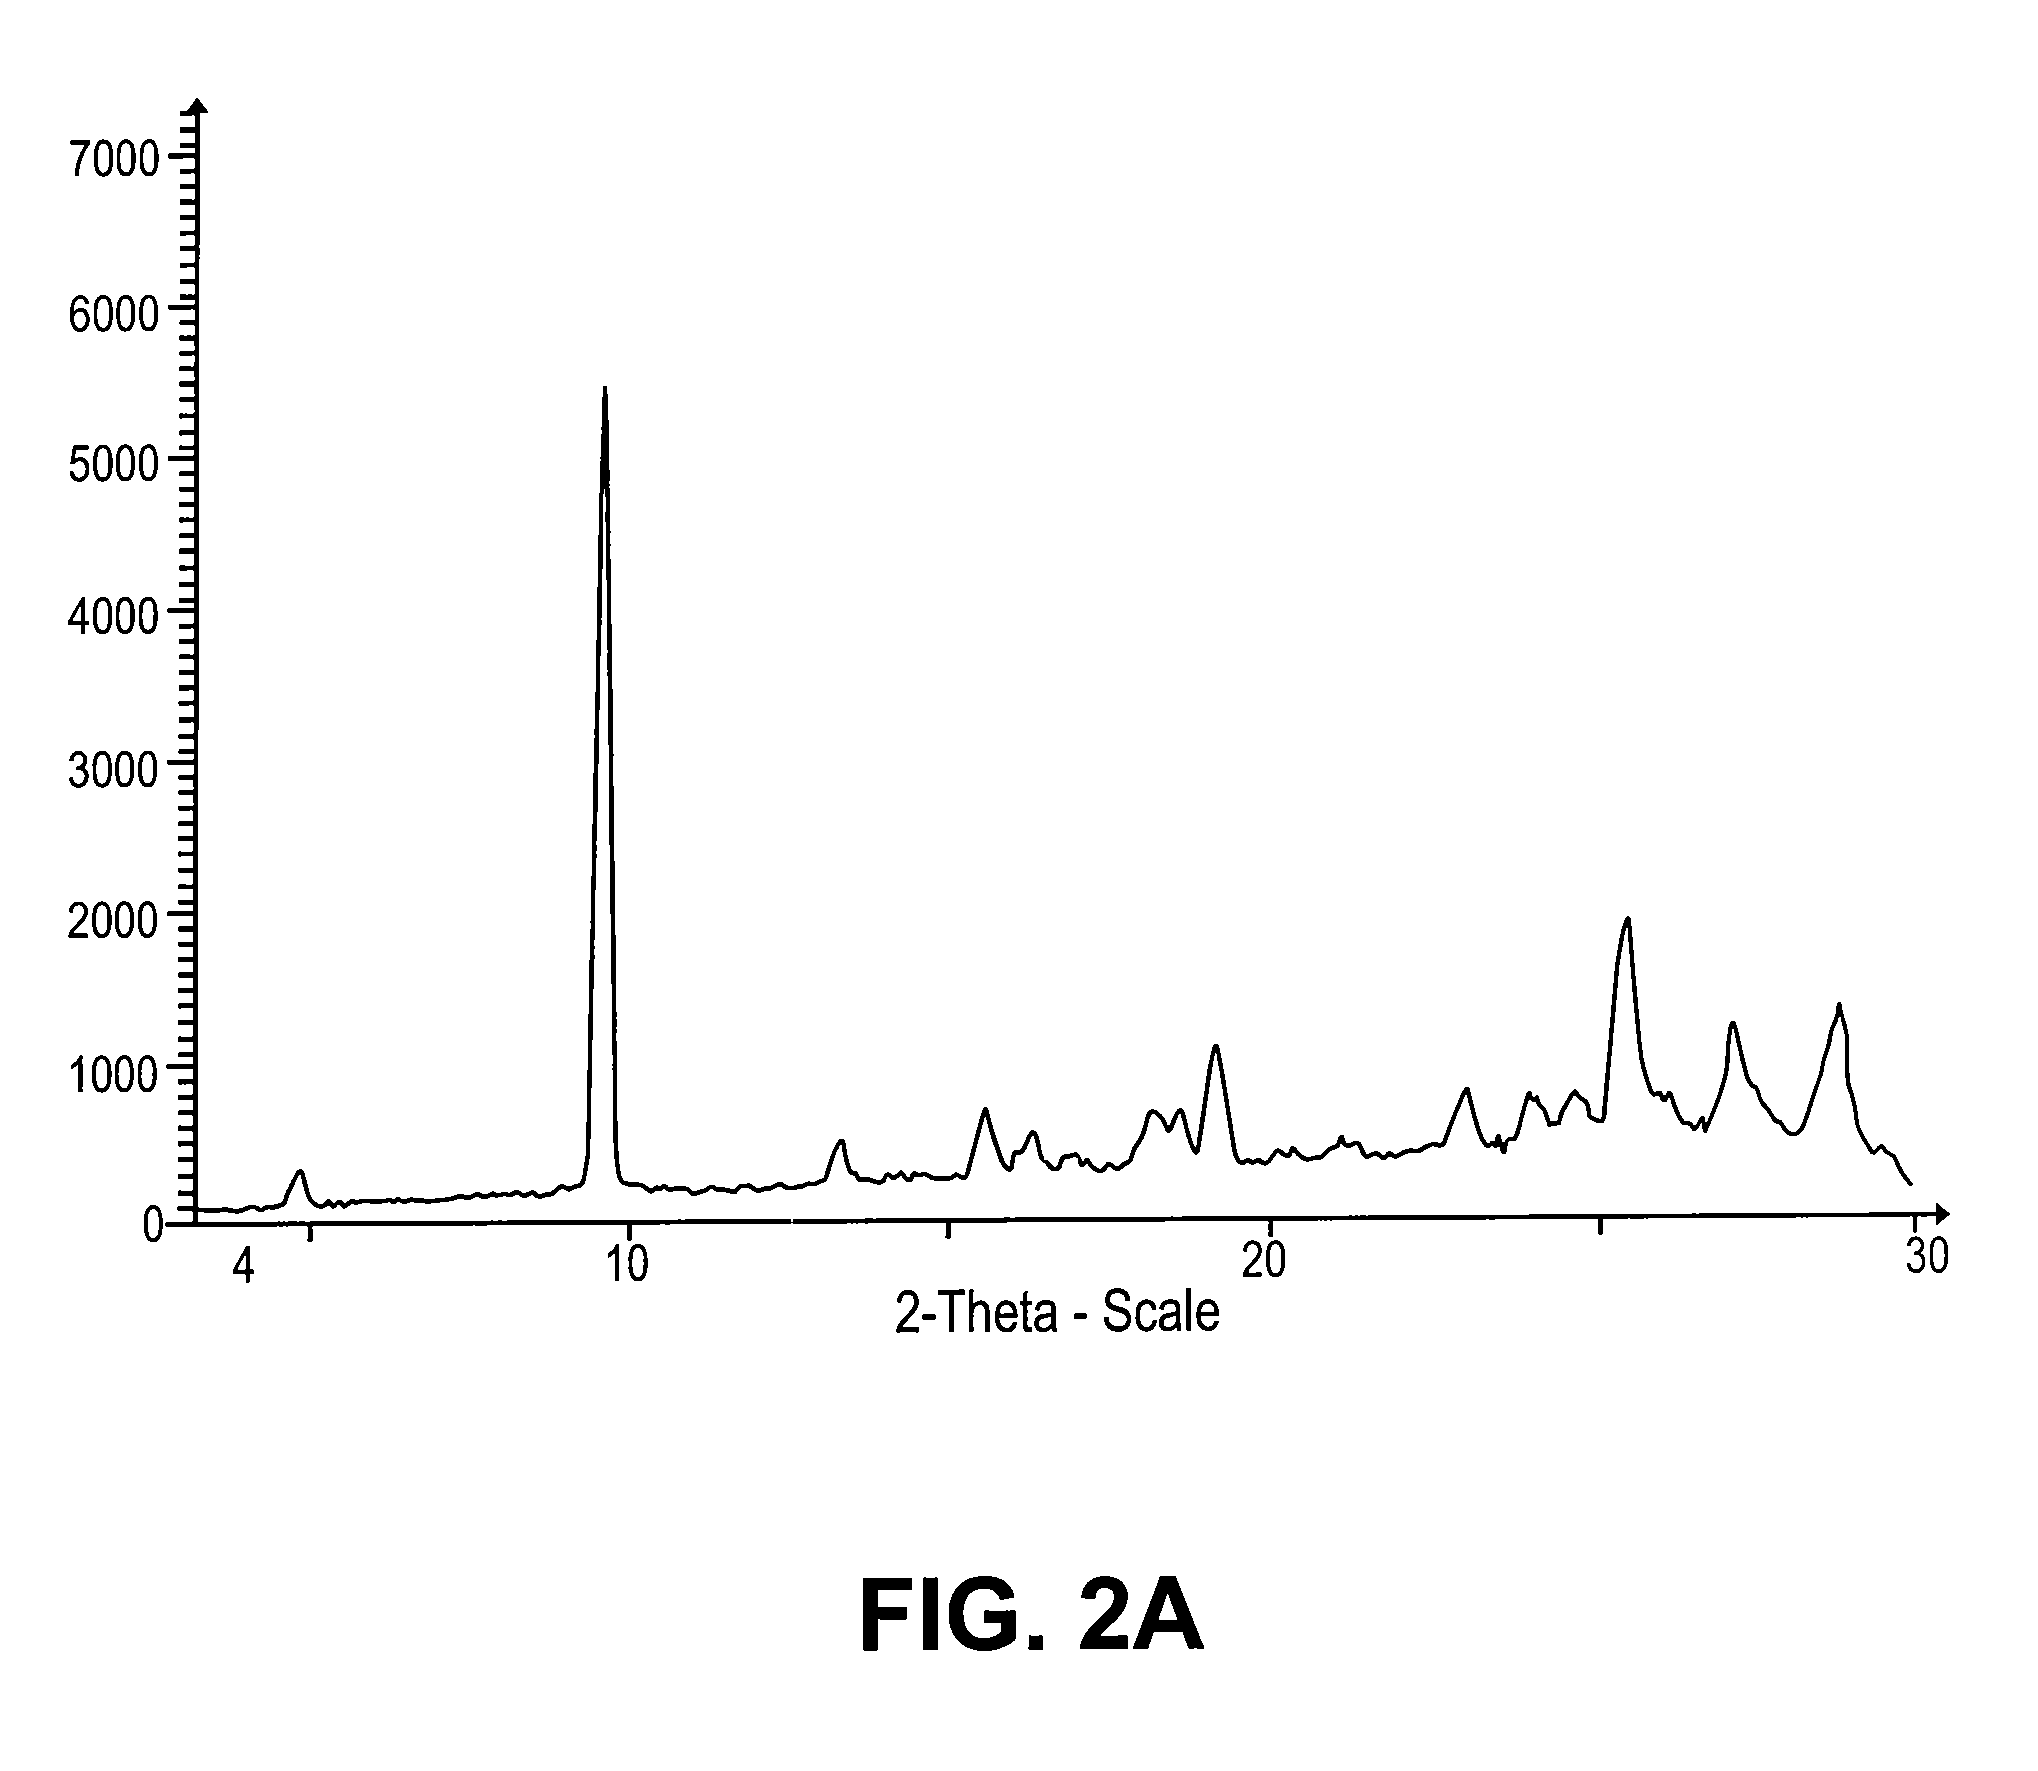 Intravenous and oral dosing of a direct-acting and reversible p2y12 inhibitor